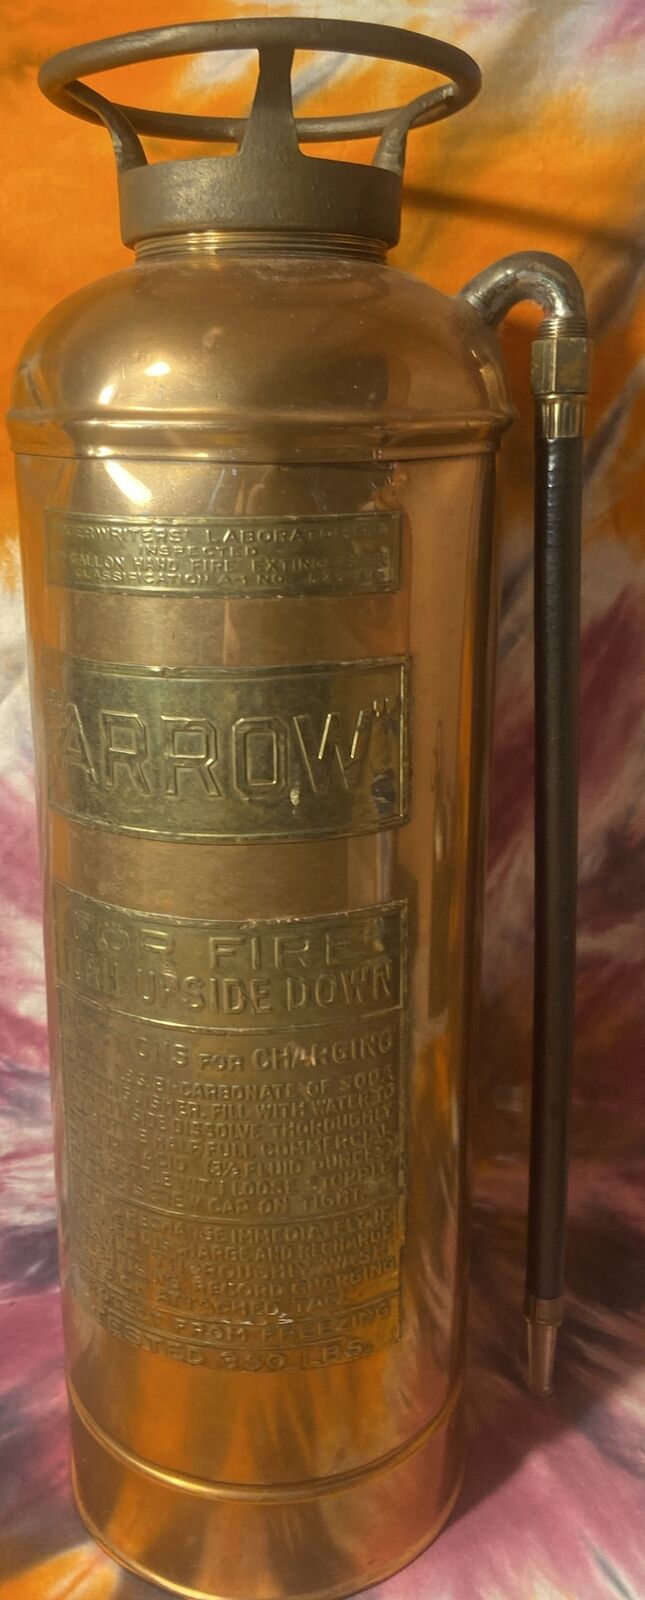 ANTIQUE ARROW COPPER FIRE EXTINGUISHER SEE PHOTOS FOR MORE DETAILS. EMPTY. @@@@@